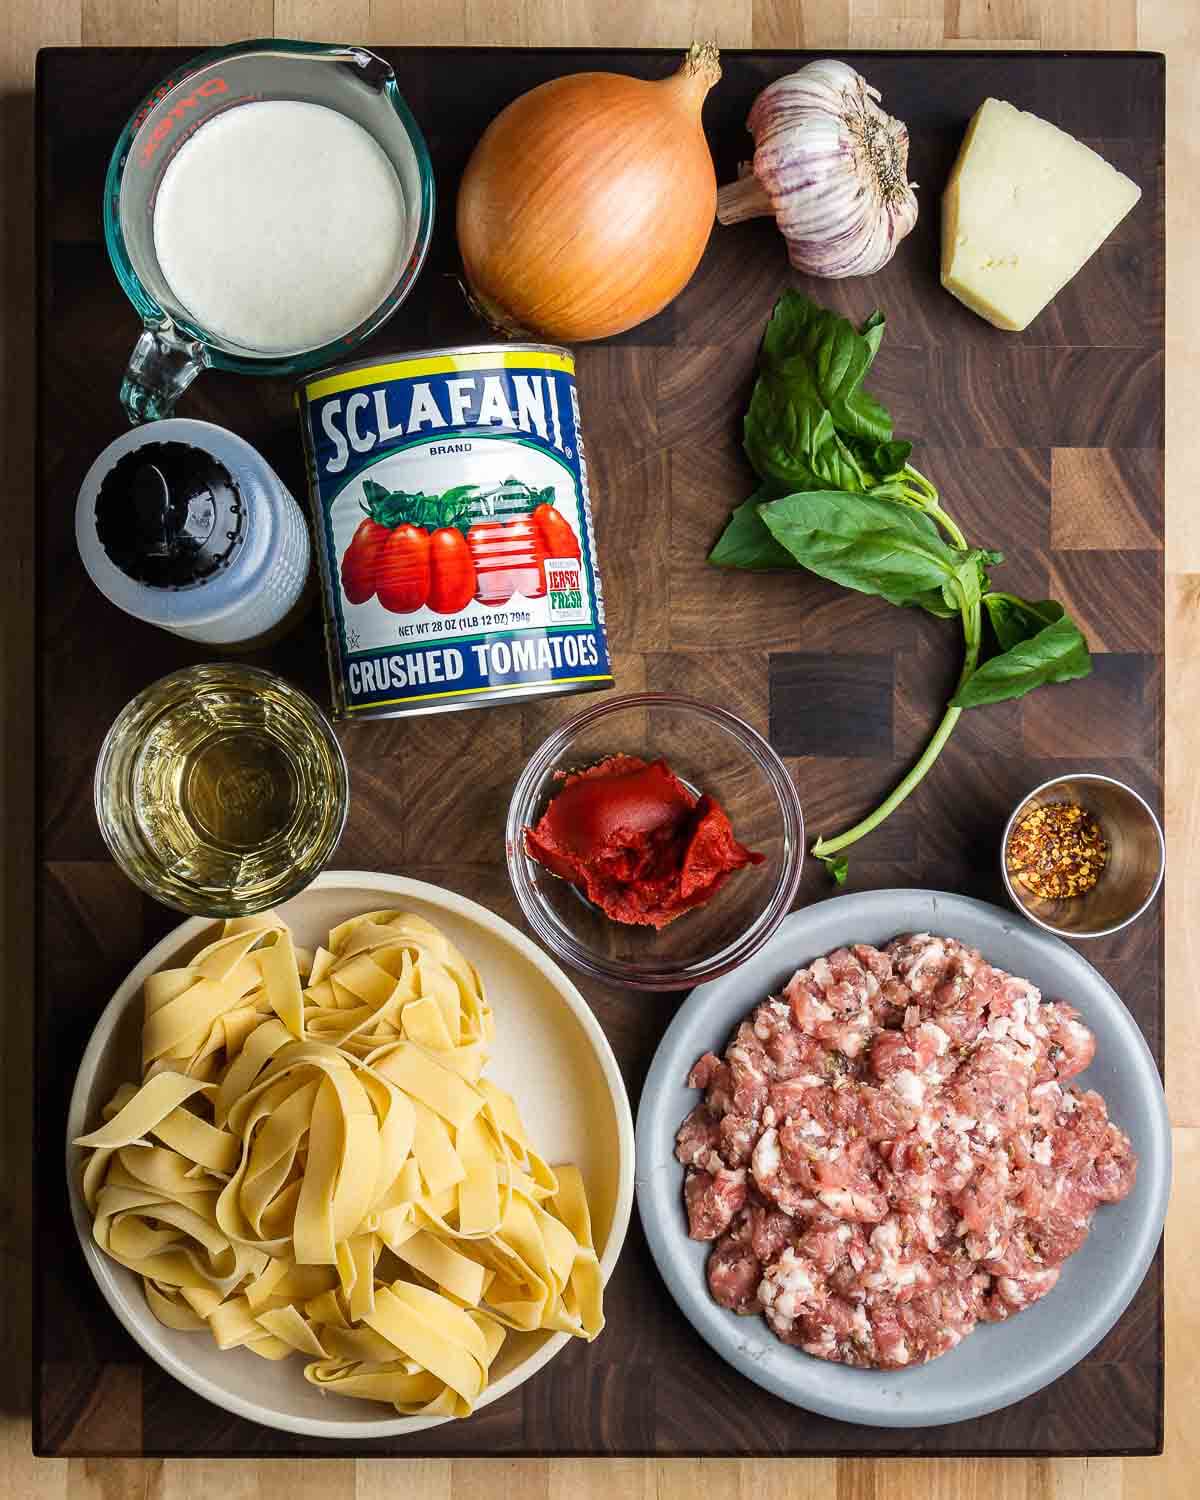 Ingredients shown: heavy cream, onion, garlic, Romano cheese, olive oil, canned tomatoes, white wine, tomato paste, basil, hot red pepper flakes, pappardelle pasta, and bulk fennel Italian sausage.